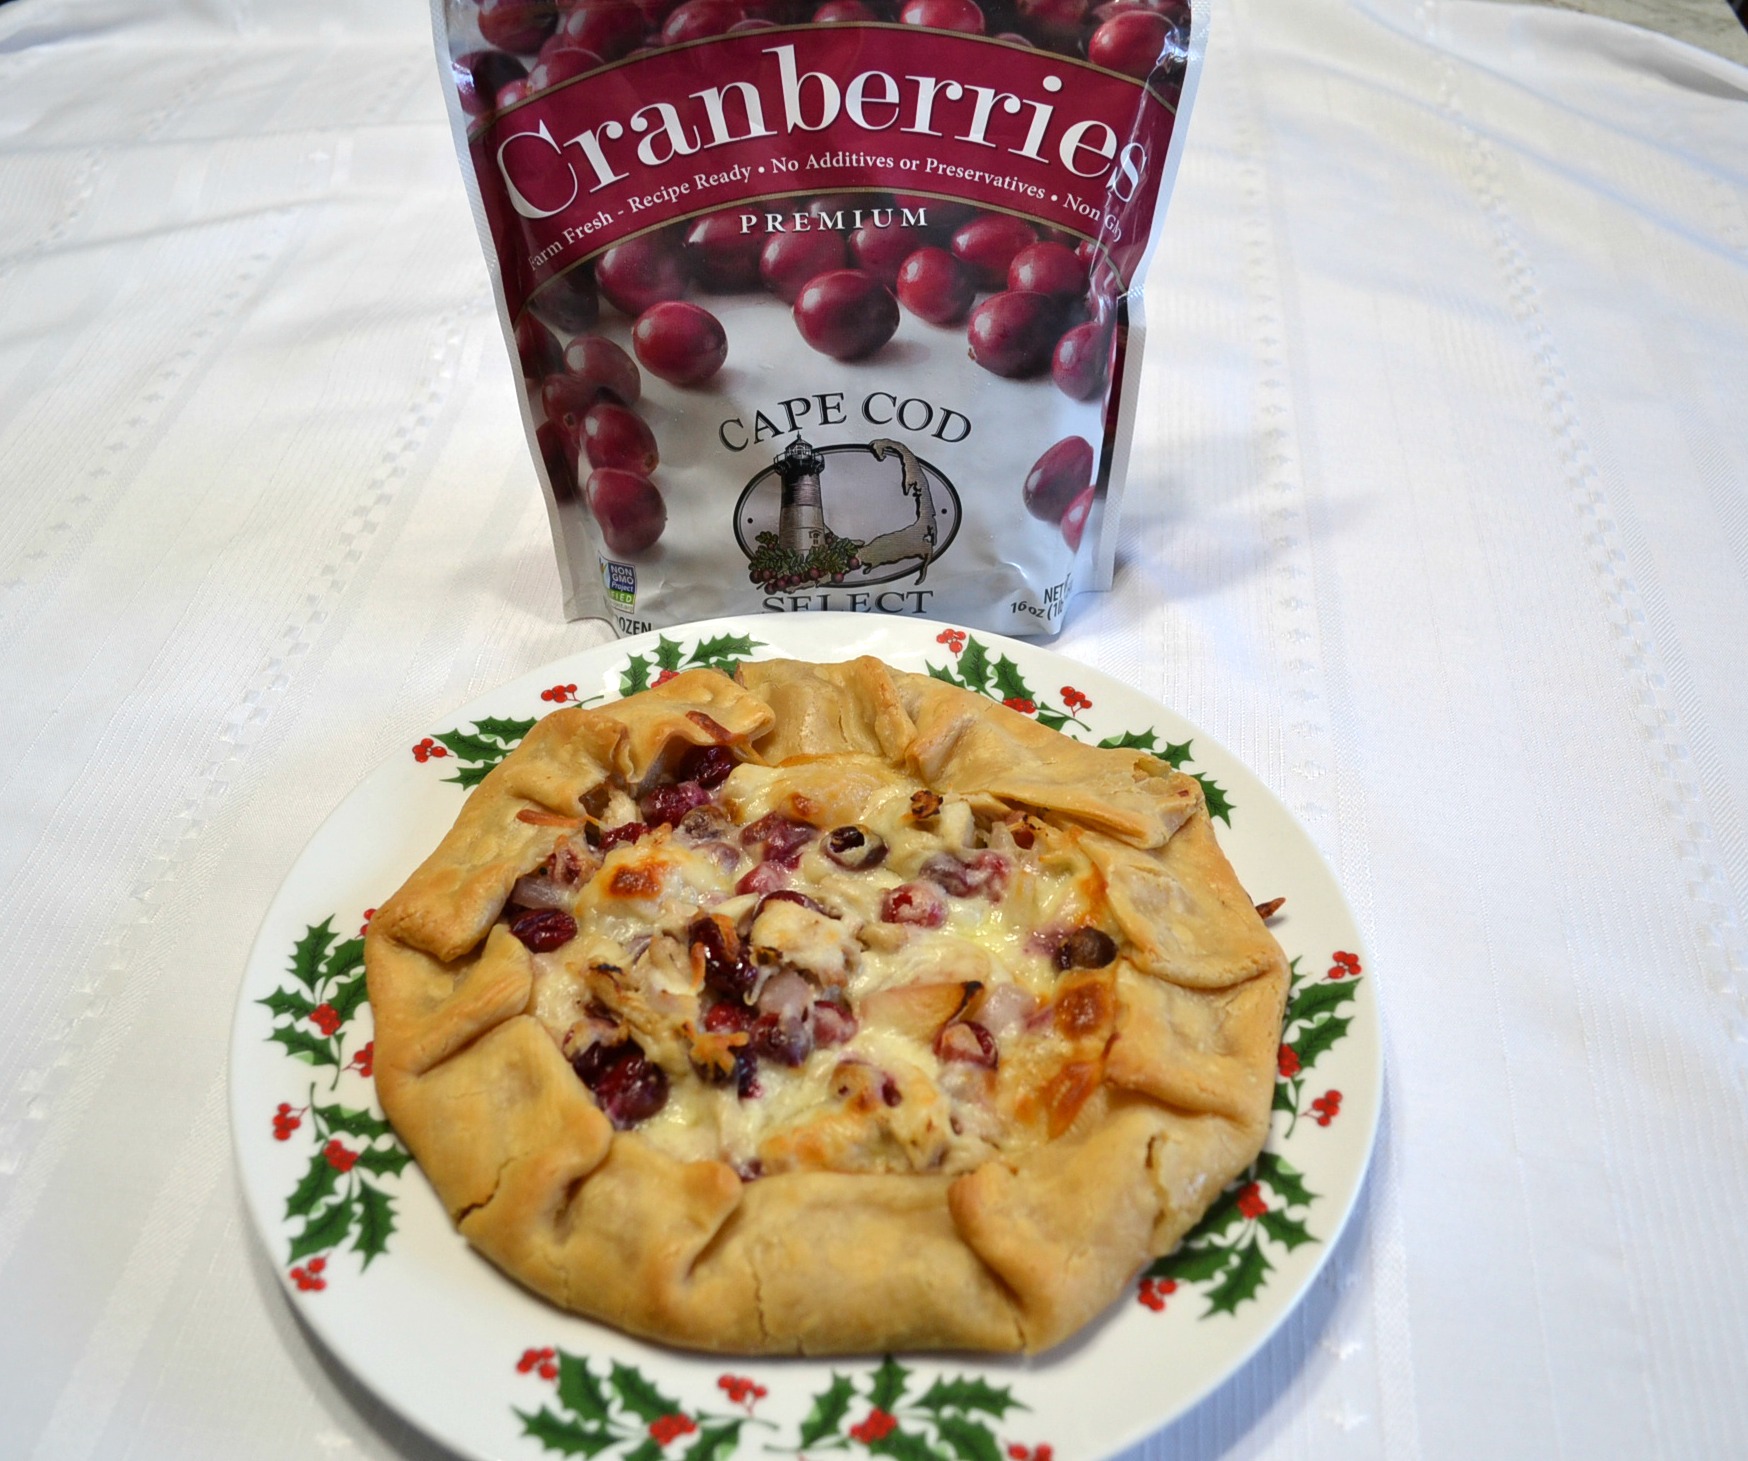 A savory recipe using Cape Cod Select Premium Frozen Cranberries for the holiday blogger challenge.